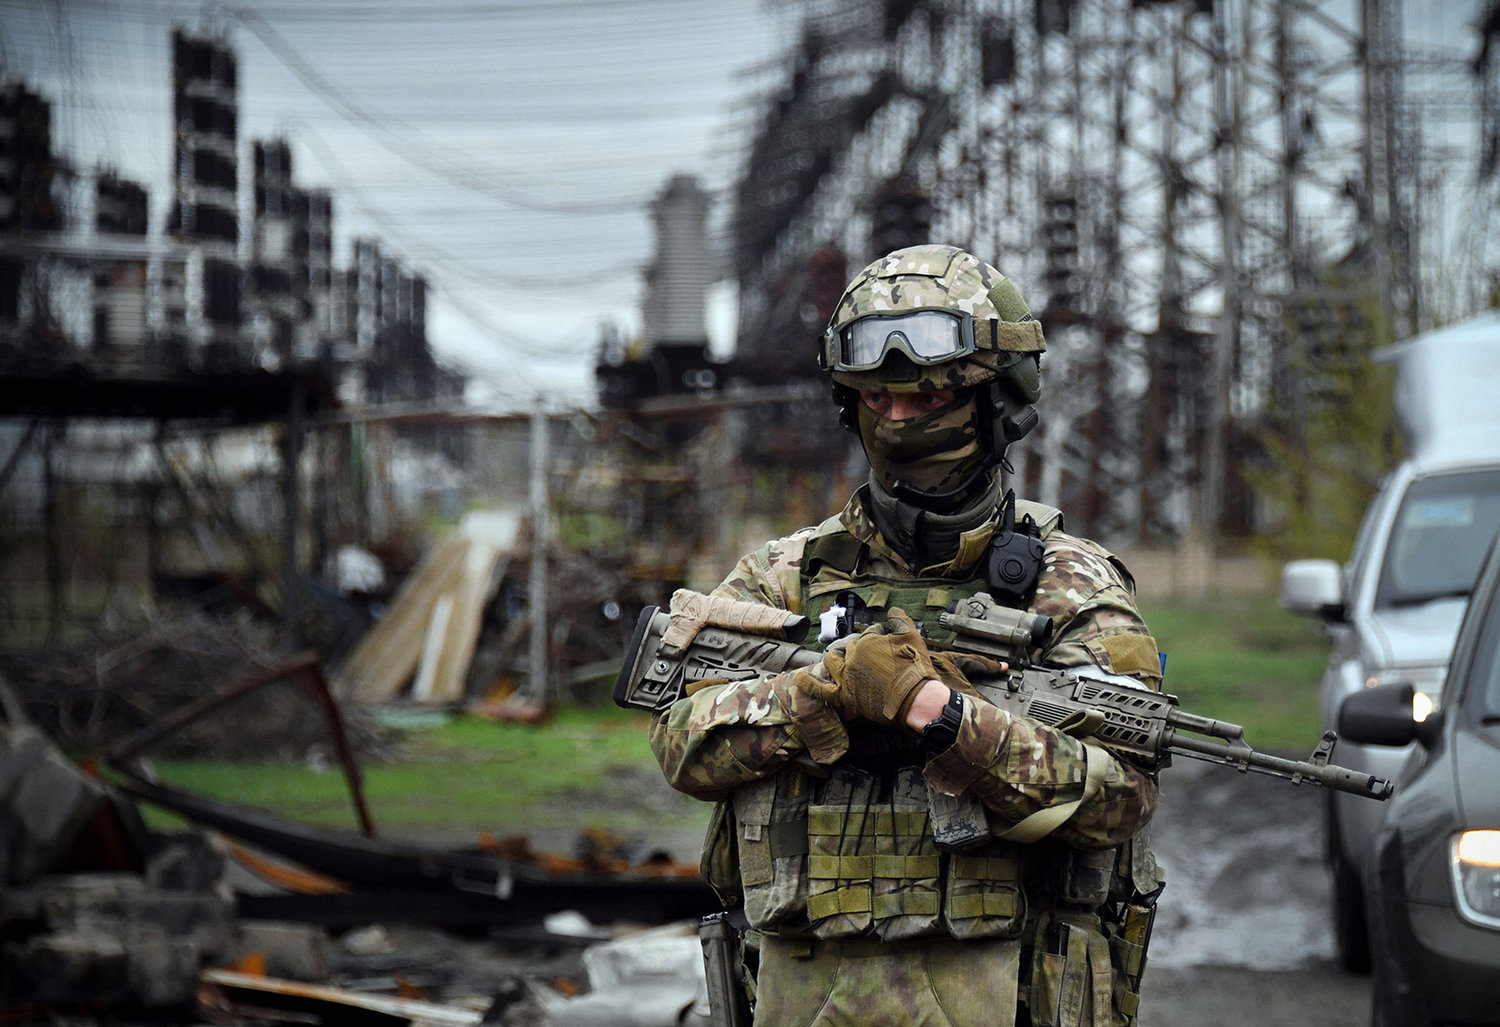 In this picture taken on April 13, 2022, a Russian soldier stands guard at the Luhansk power plant in the town of Shchastya. *EDITOR'S NOTE: This picture was taken during a trip organized by the Russian military.* (Alexander Nemenov/AFP via Getty Images/TNS)